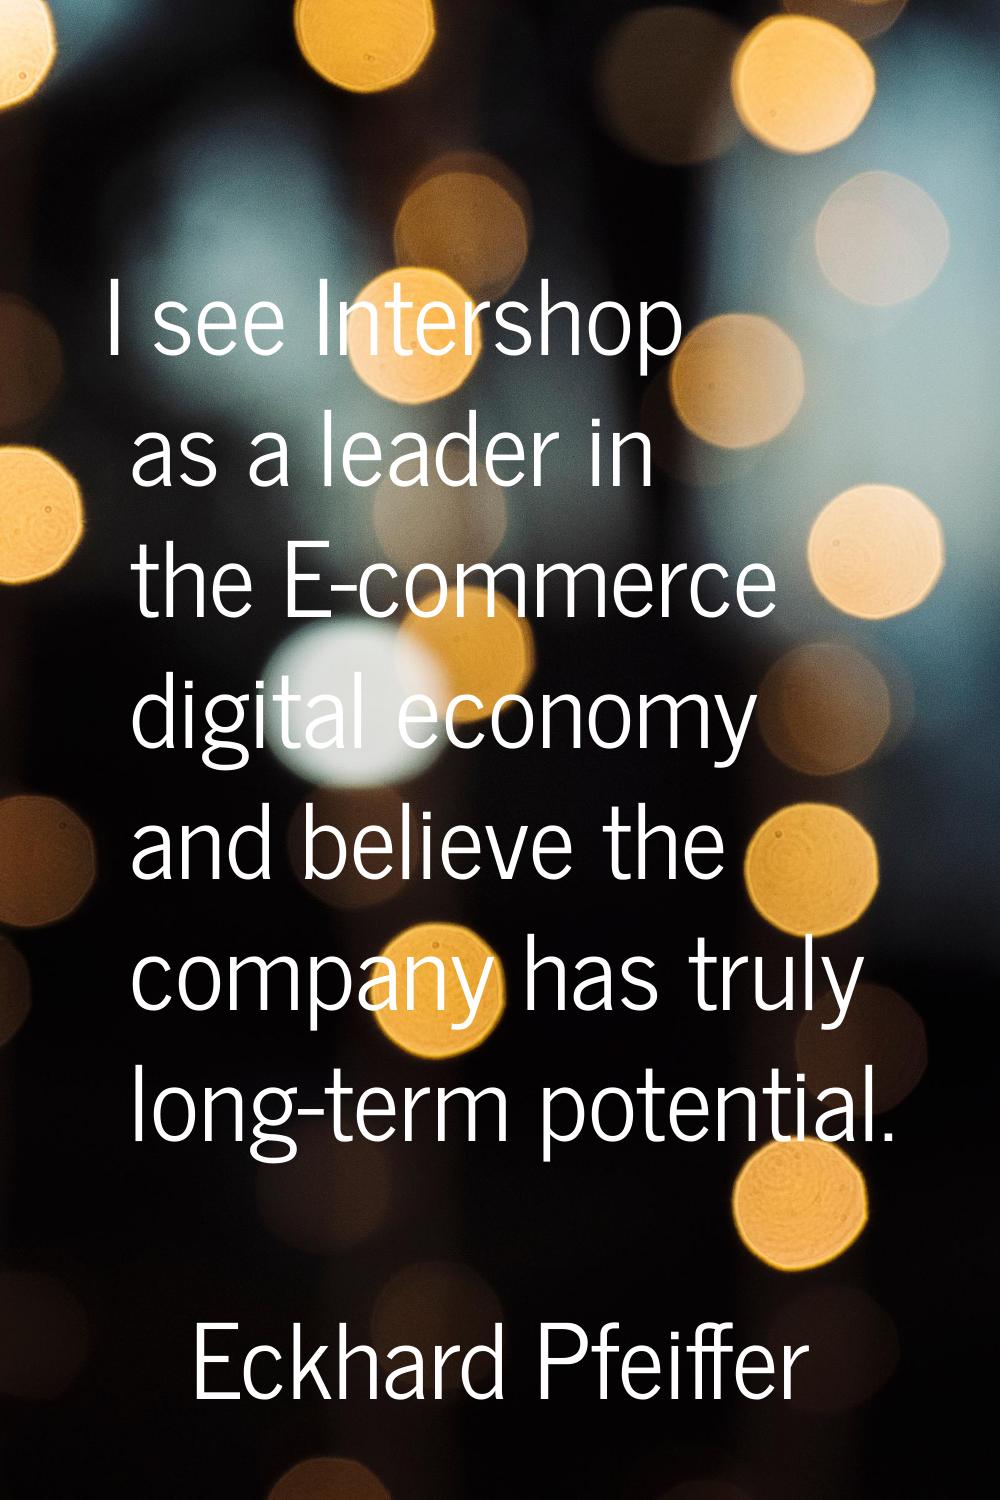 I see Intershop as a leader in the E-commerce digital economy and believe the company has truly lon